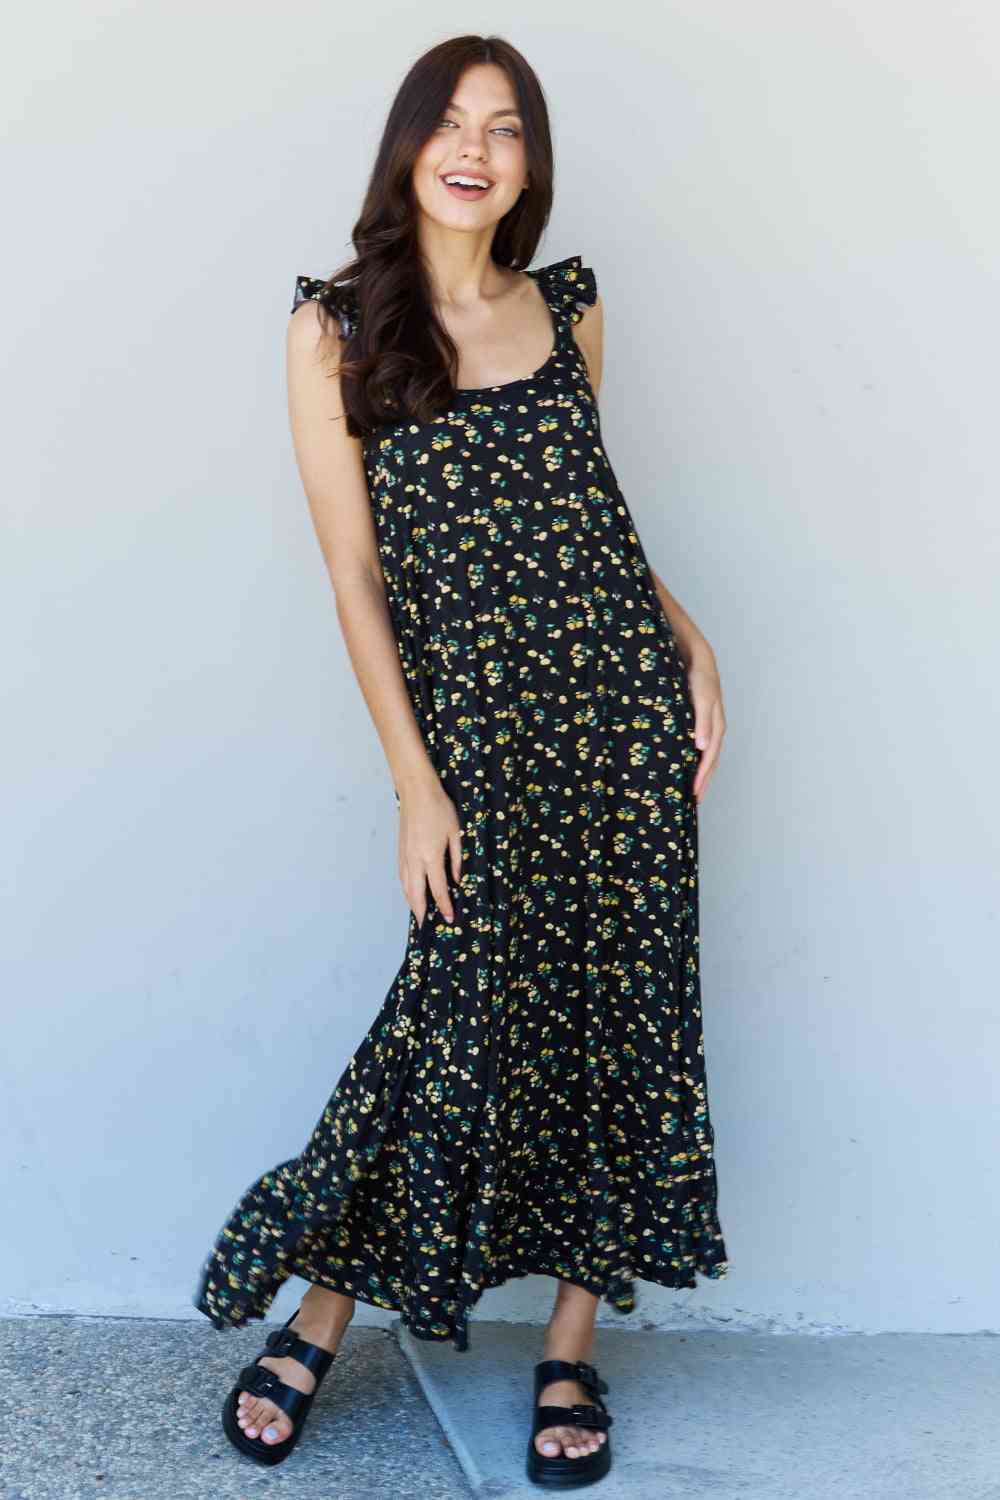 Doublju In The Garden Ruffle Floral Maxi Dress in  Black Yellow Floral Print on any thing USA/STOD clothes